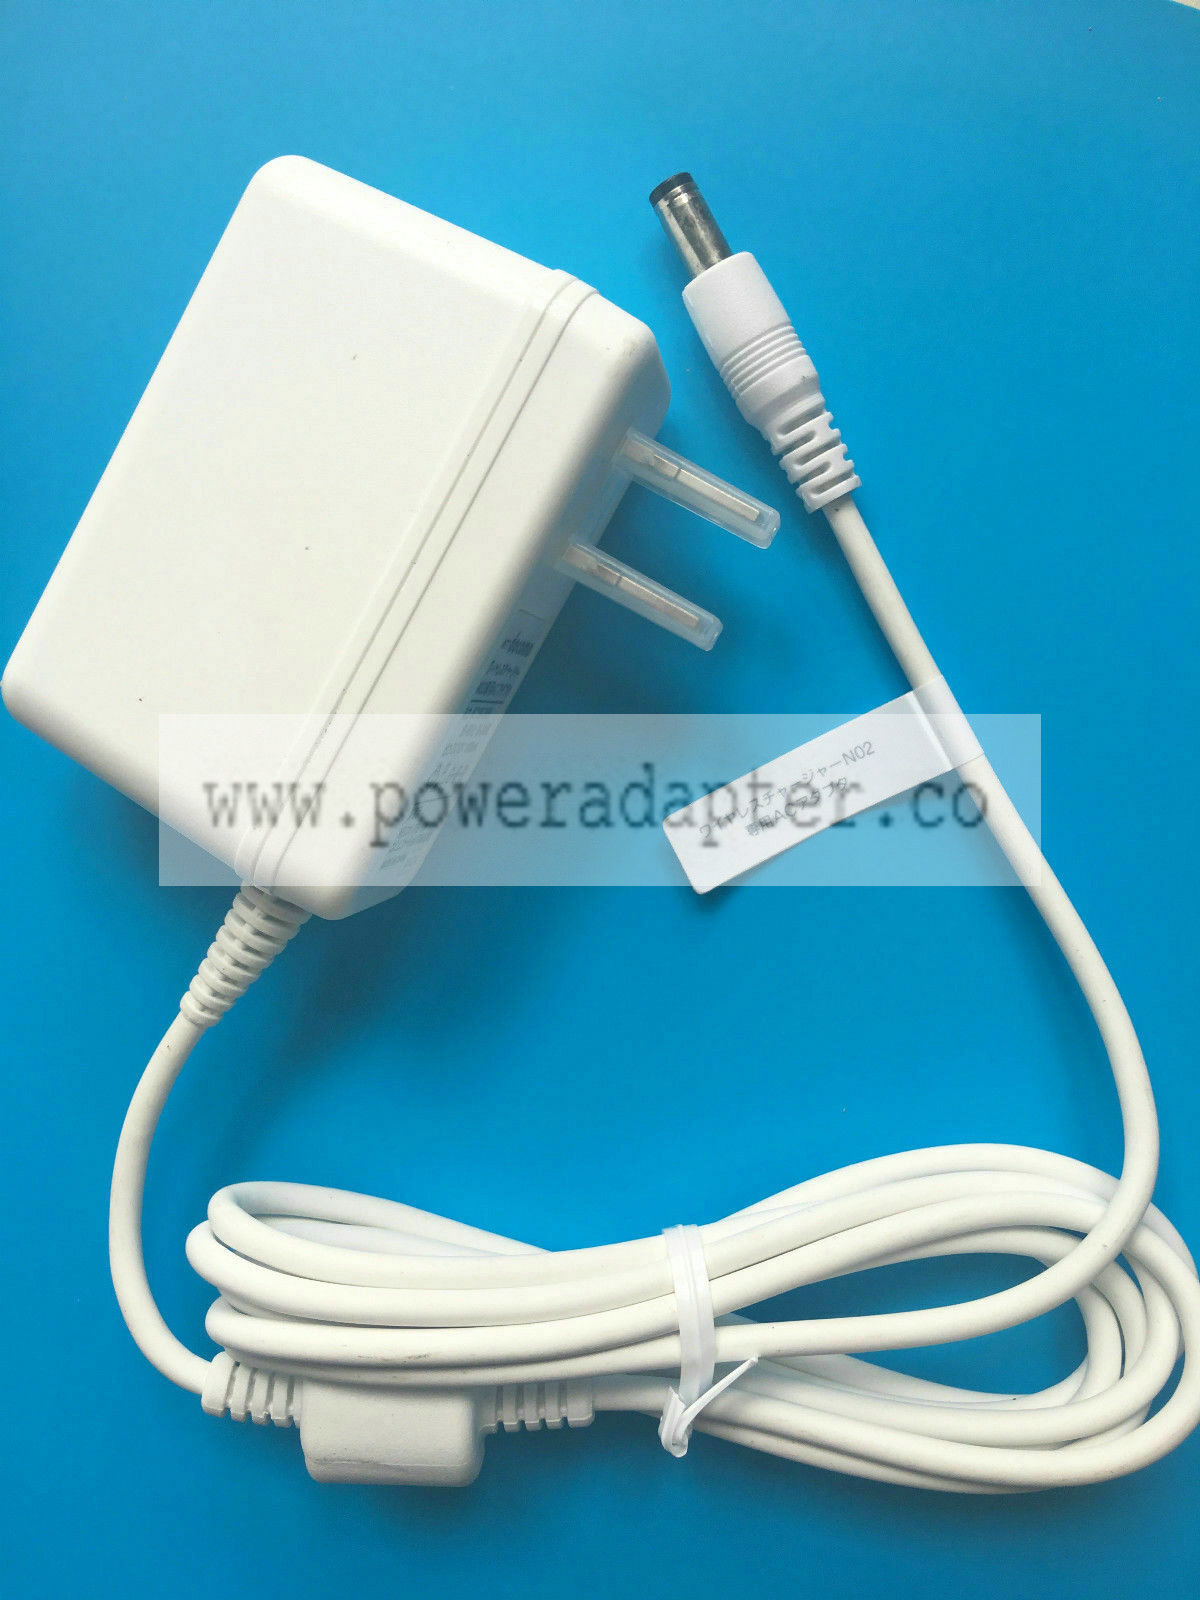 AC Power Supply Cord 122 SoClean 2 CPAP/BiPAP Sanitizers Brand: CW Type: AC/DC Adapter Charger Type: Mains Charger